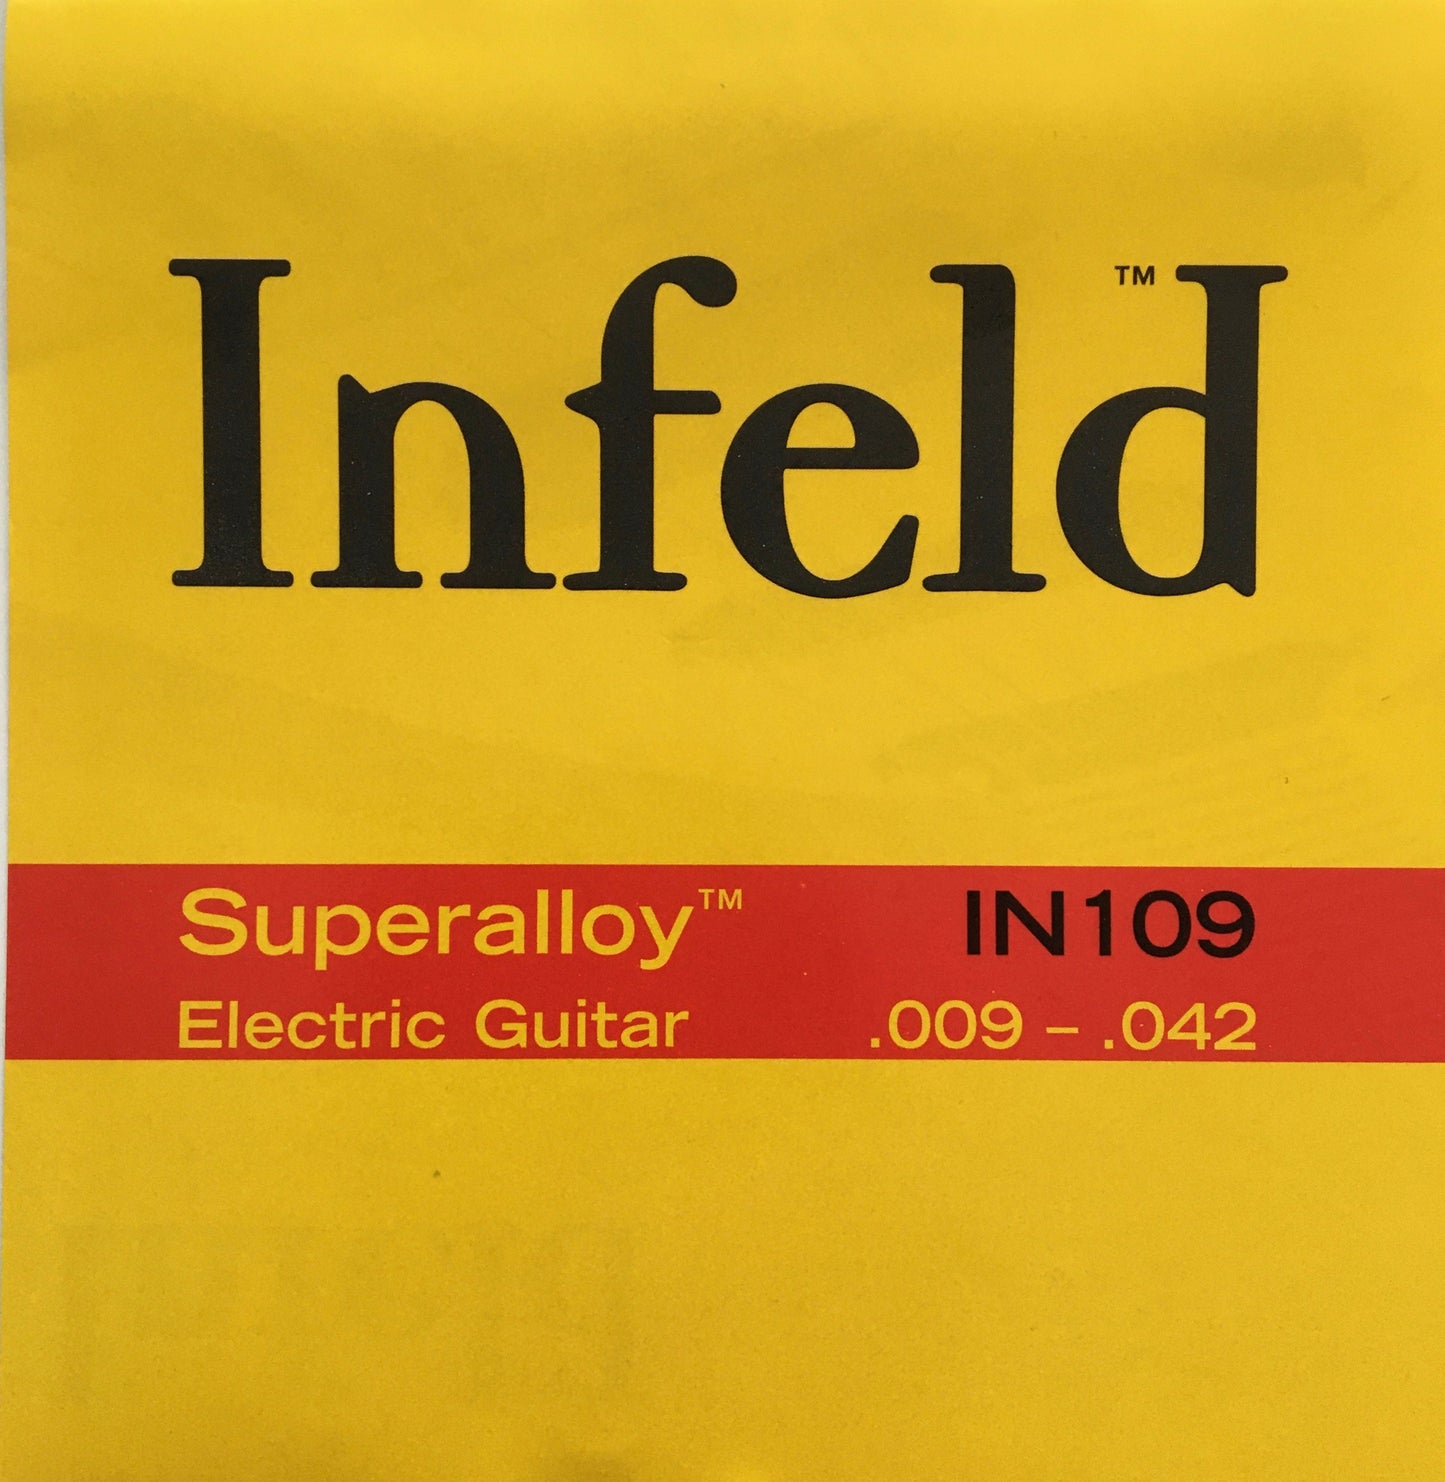 Infeld Superalloy Electric Guitar String Set Strings, Bows & More